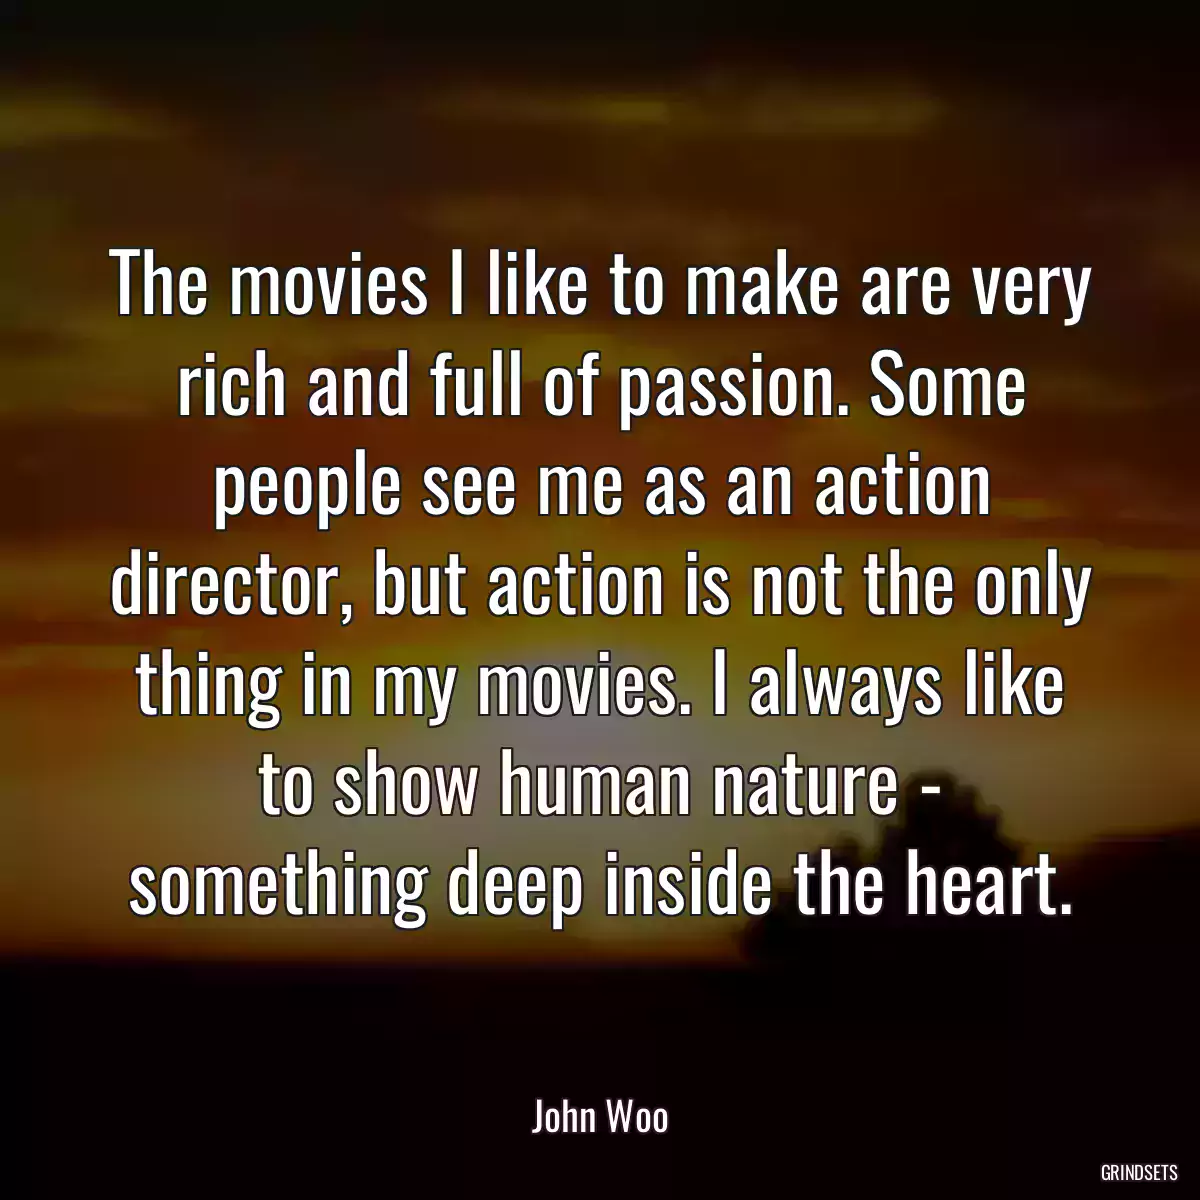 The movies I like to make are very rich and full of passion. Some people see me as an action director, but action is not the only thing in my movies. I always like to show human nature - something deep inside the heart.